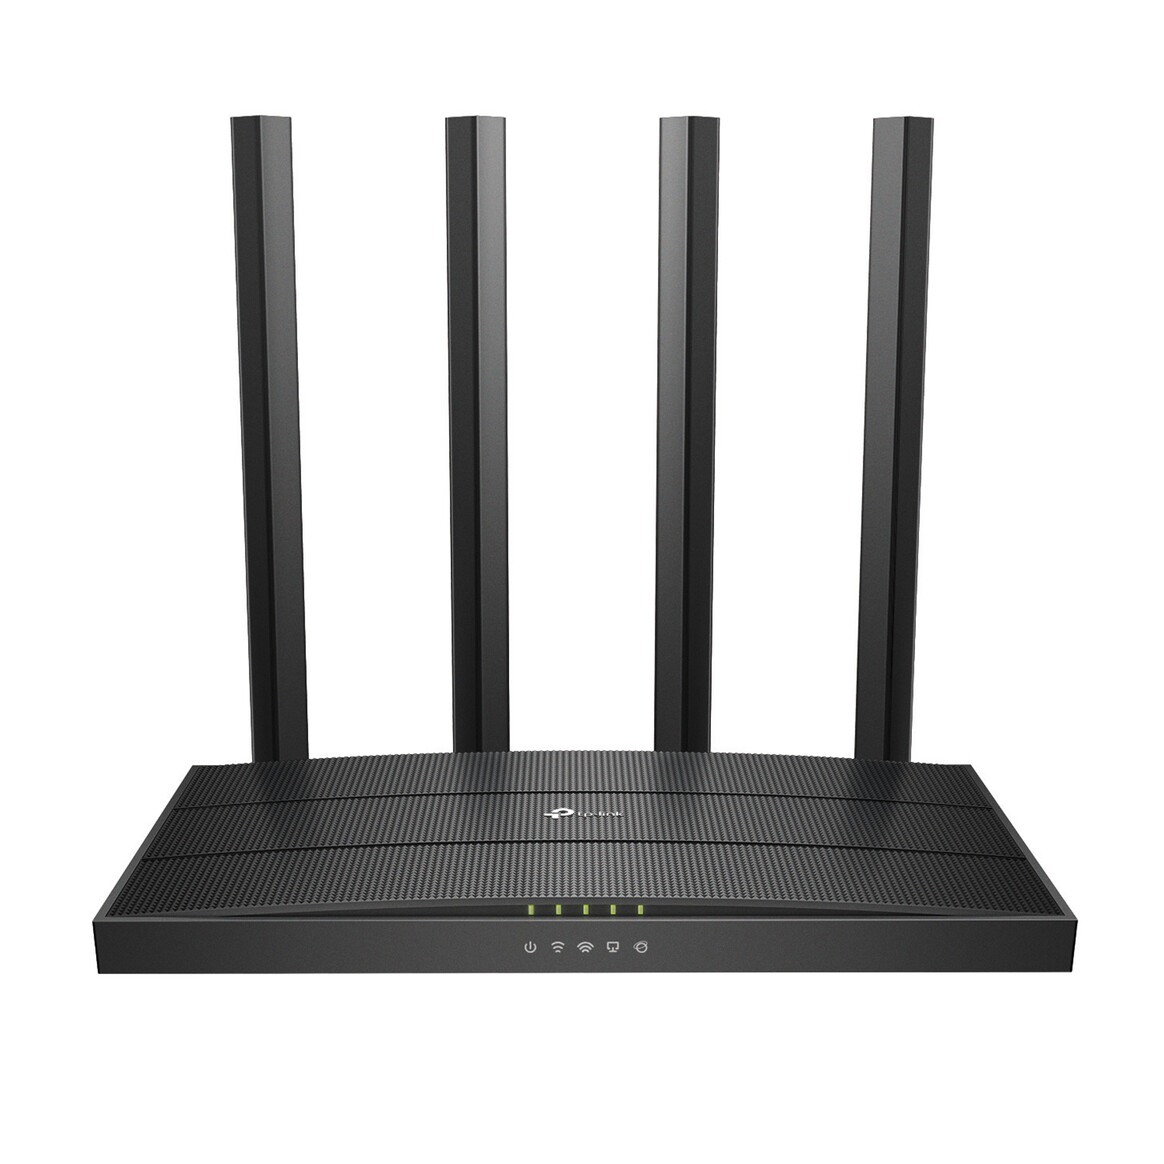 <h1>TP-Link Archer C80 AC1900 Duallband WLAN Router</h1>